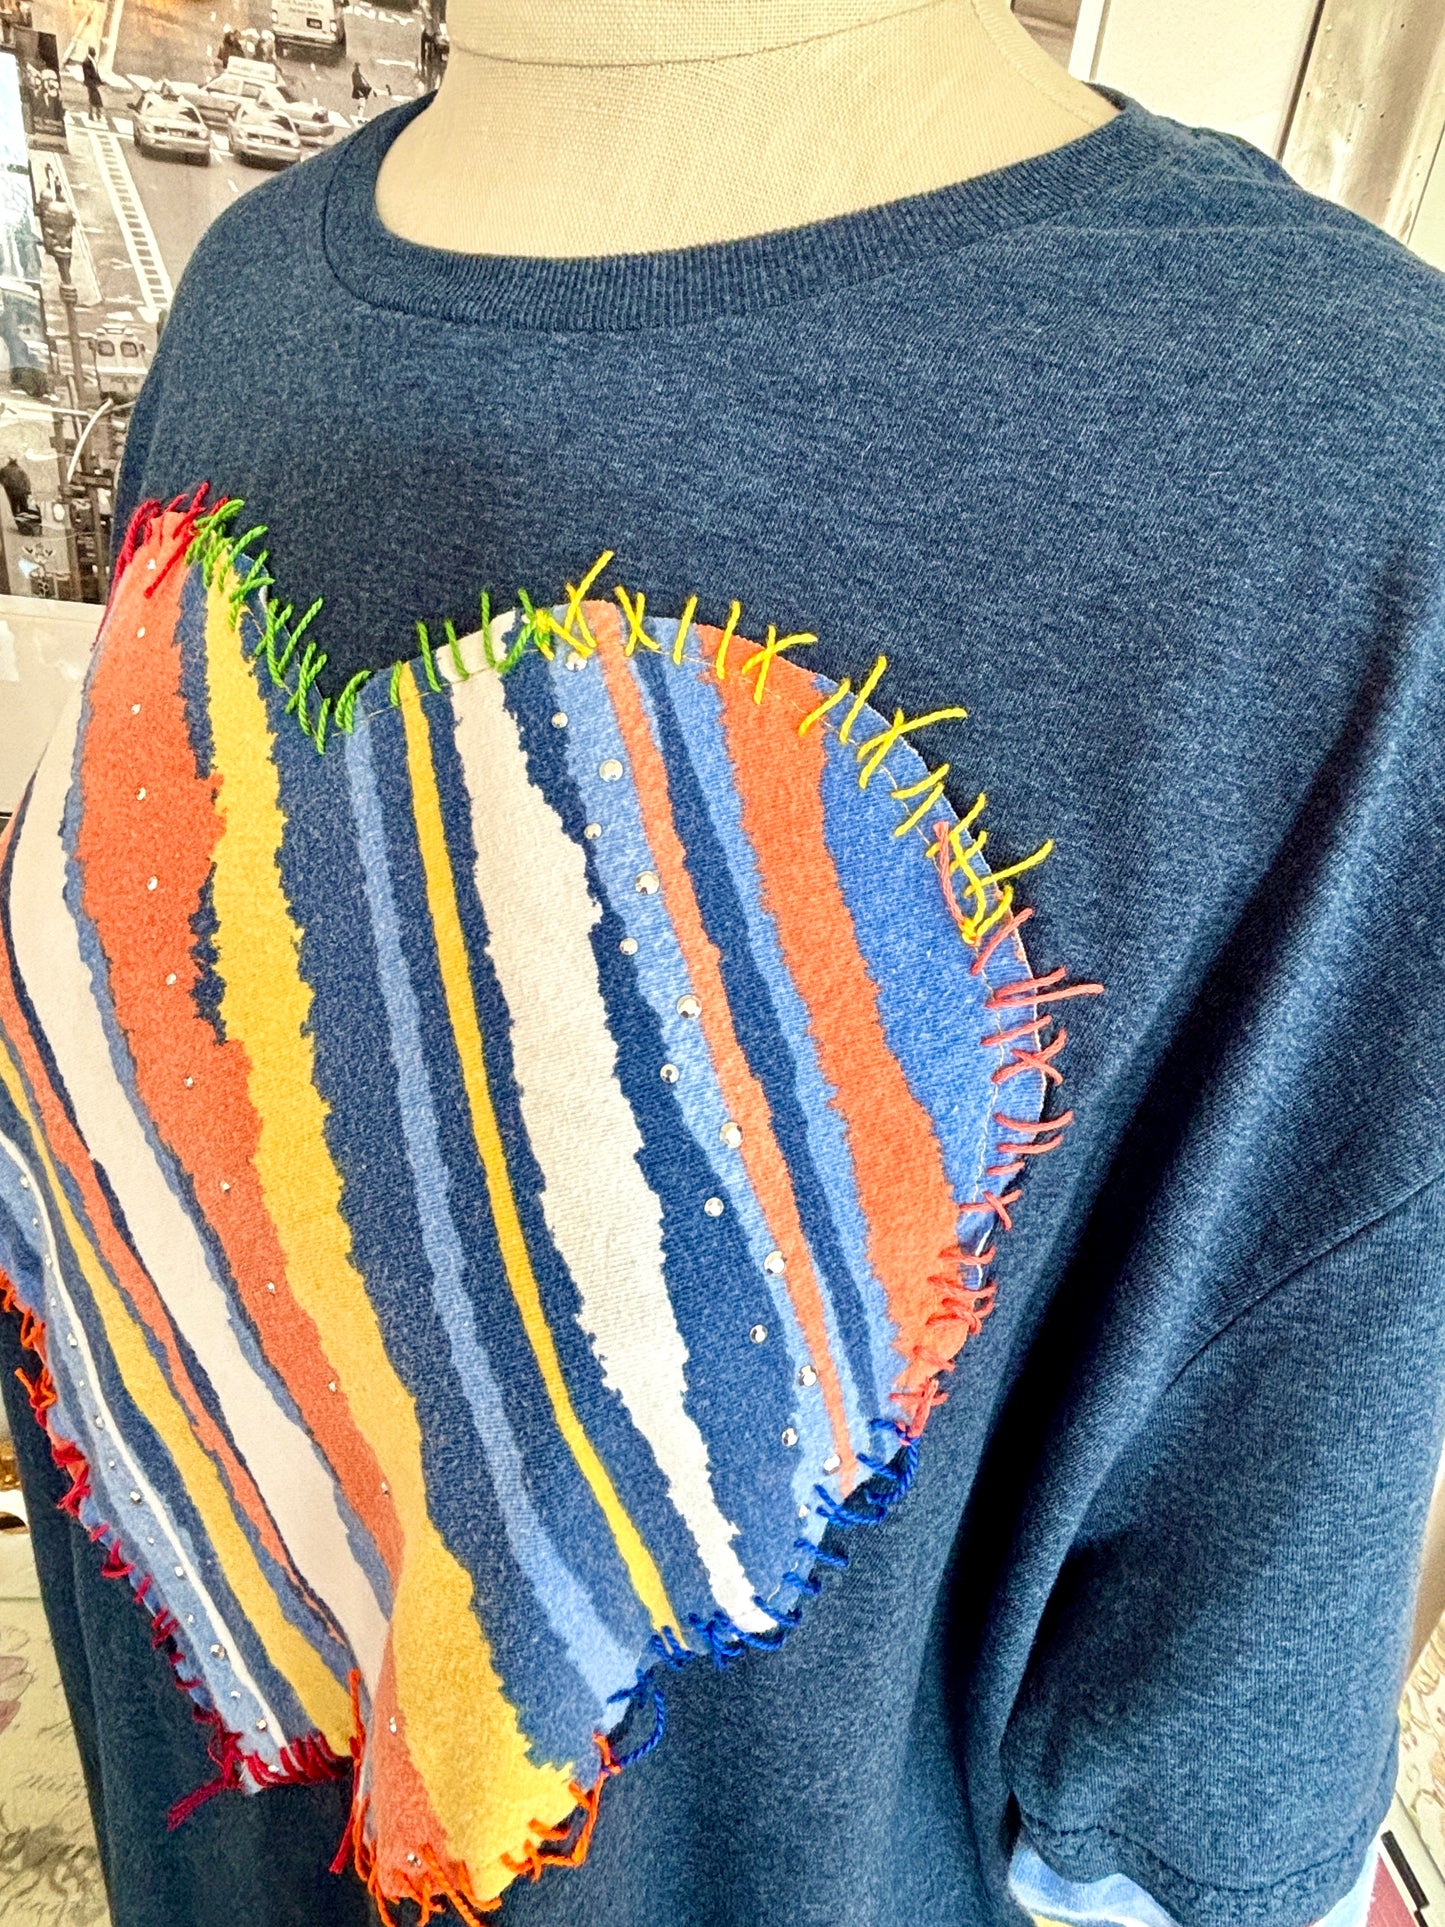 Up-cycled, LOVE, TShirt, Boho, Heart, Emroidered, Clothing, Hippie, Trendy, Hand made, 70s, Cozy, ReStyled, BLUE 2XL, Recycled